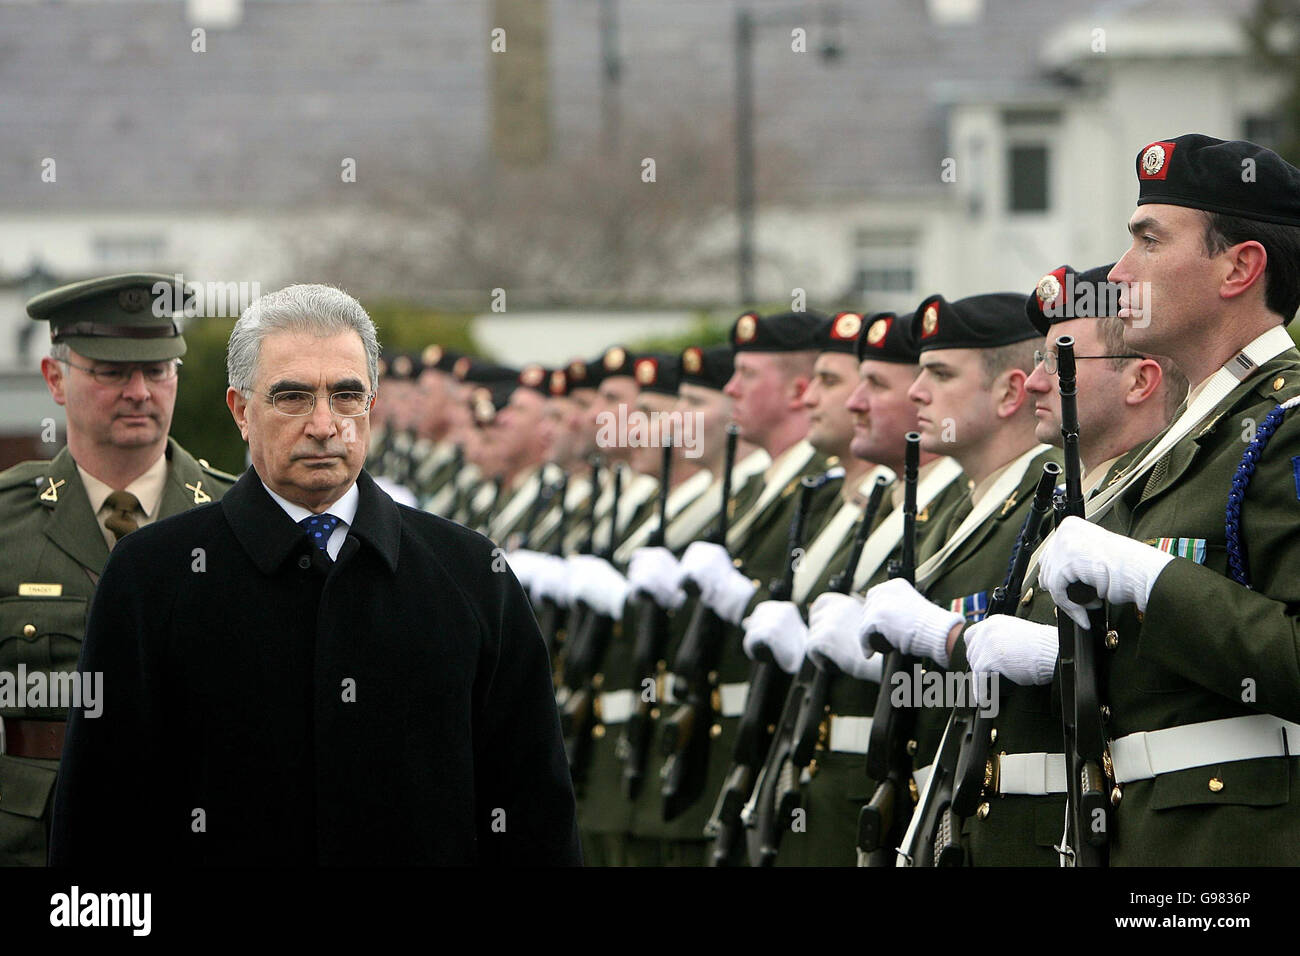 His Excellency Dr Salah Al-Shaikhly Ambassador of Republic of Iraq inspects the guard of honour after presenting his credentials to President Mary McAleese at Aras an Uachtarain in Dublin, Tuesday March 21, 2006. PRESS ASSOCIATION Photo. Photo credit should read: Julien Behal/PA Stock Photo